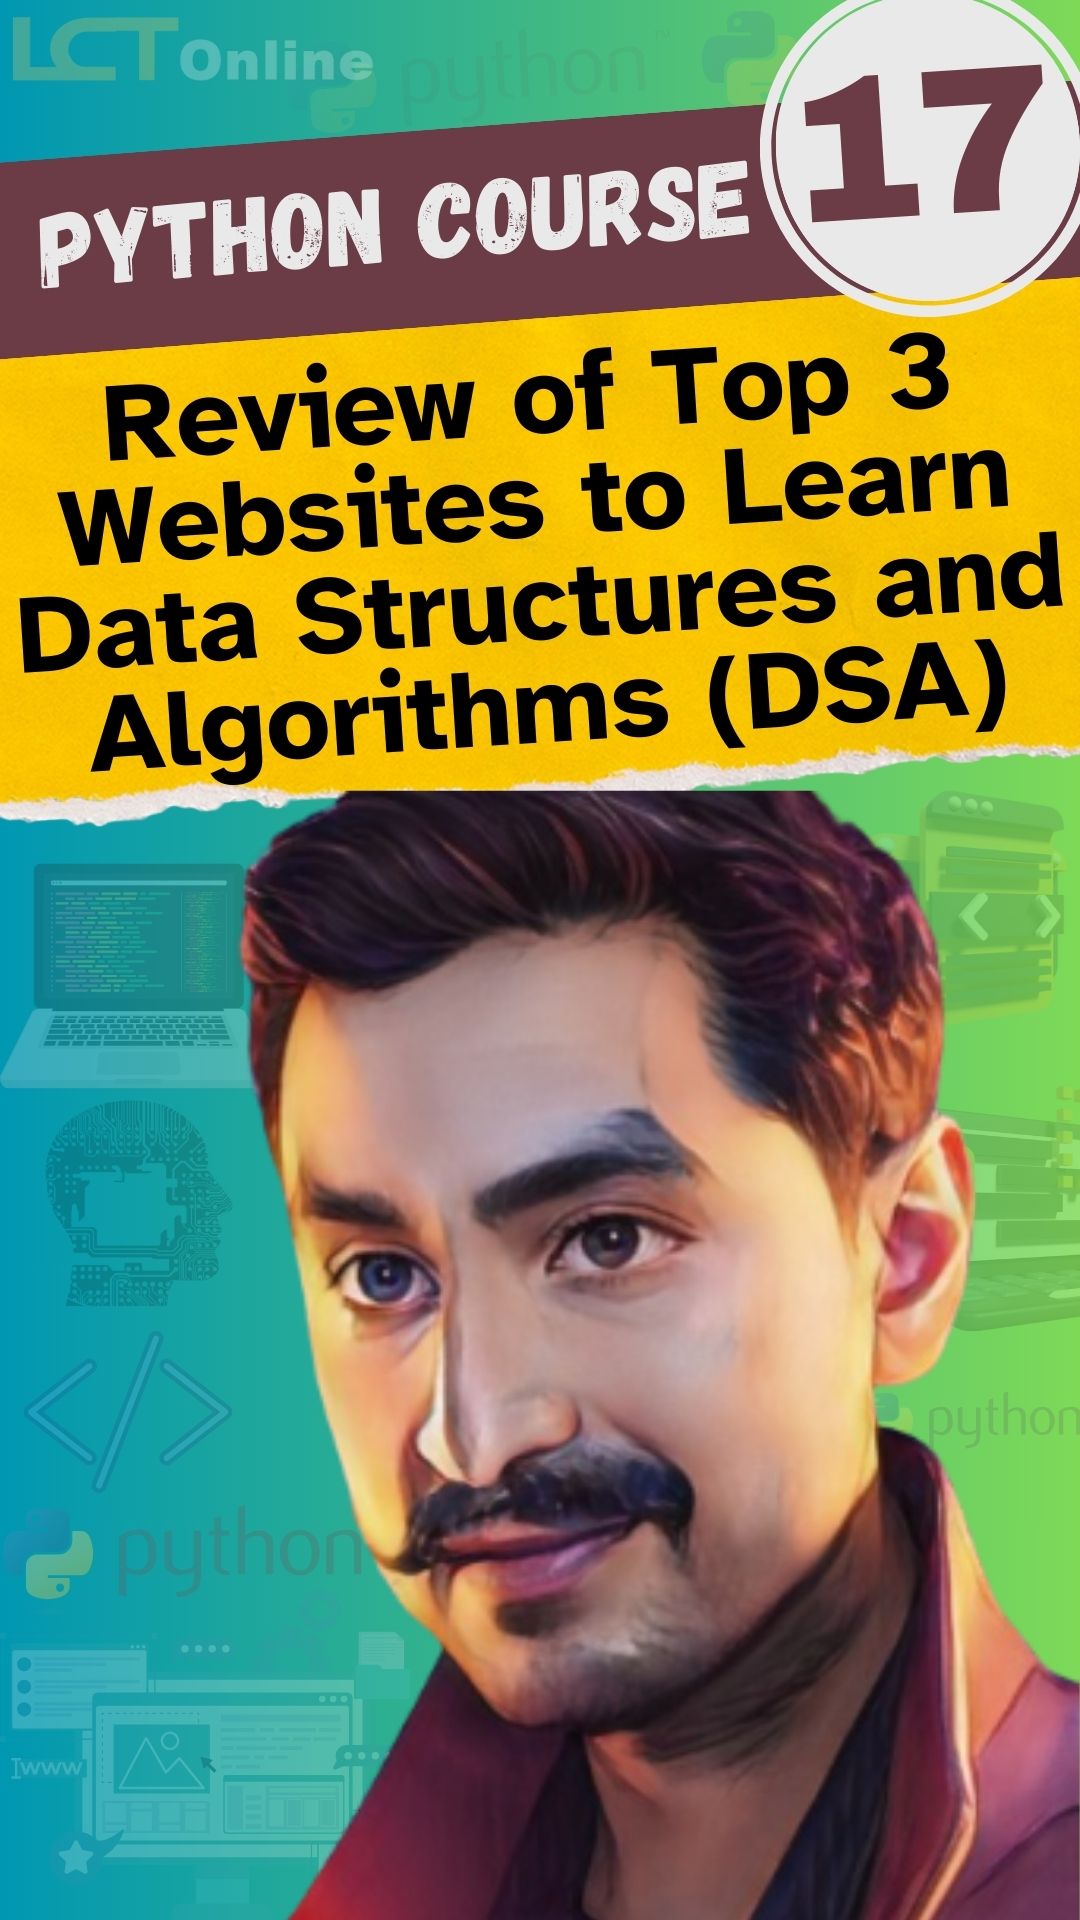 Review of Top 3 Websites to Learn Data Structures and Algorithms (DSA)